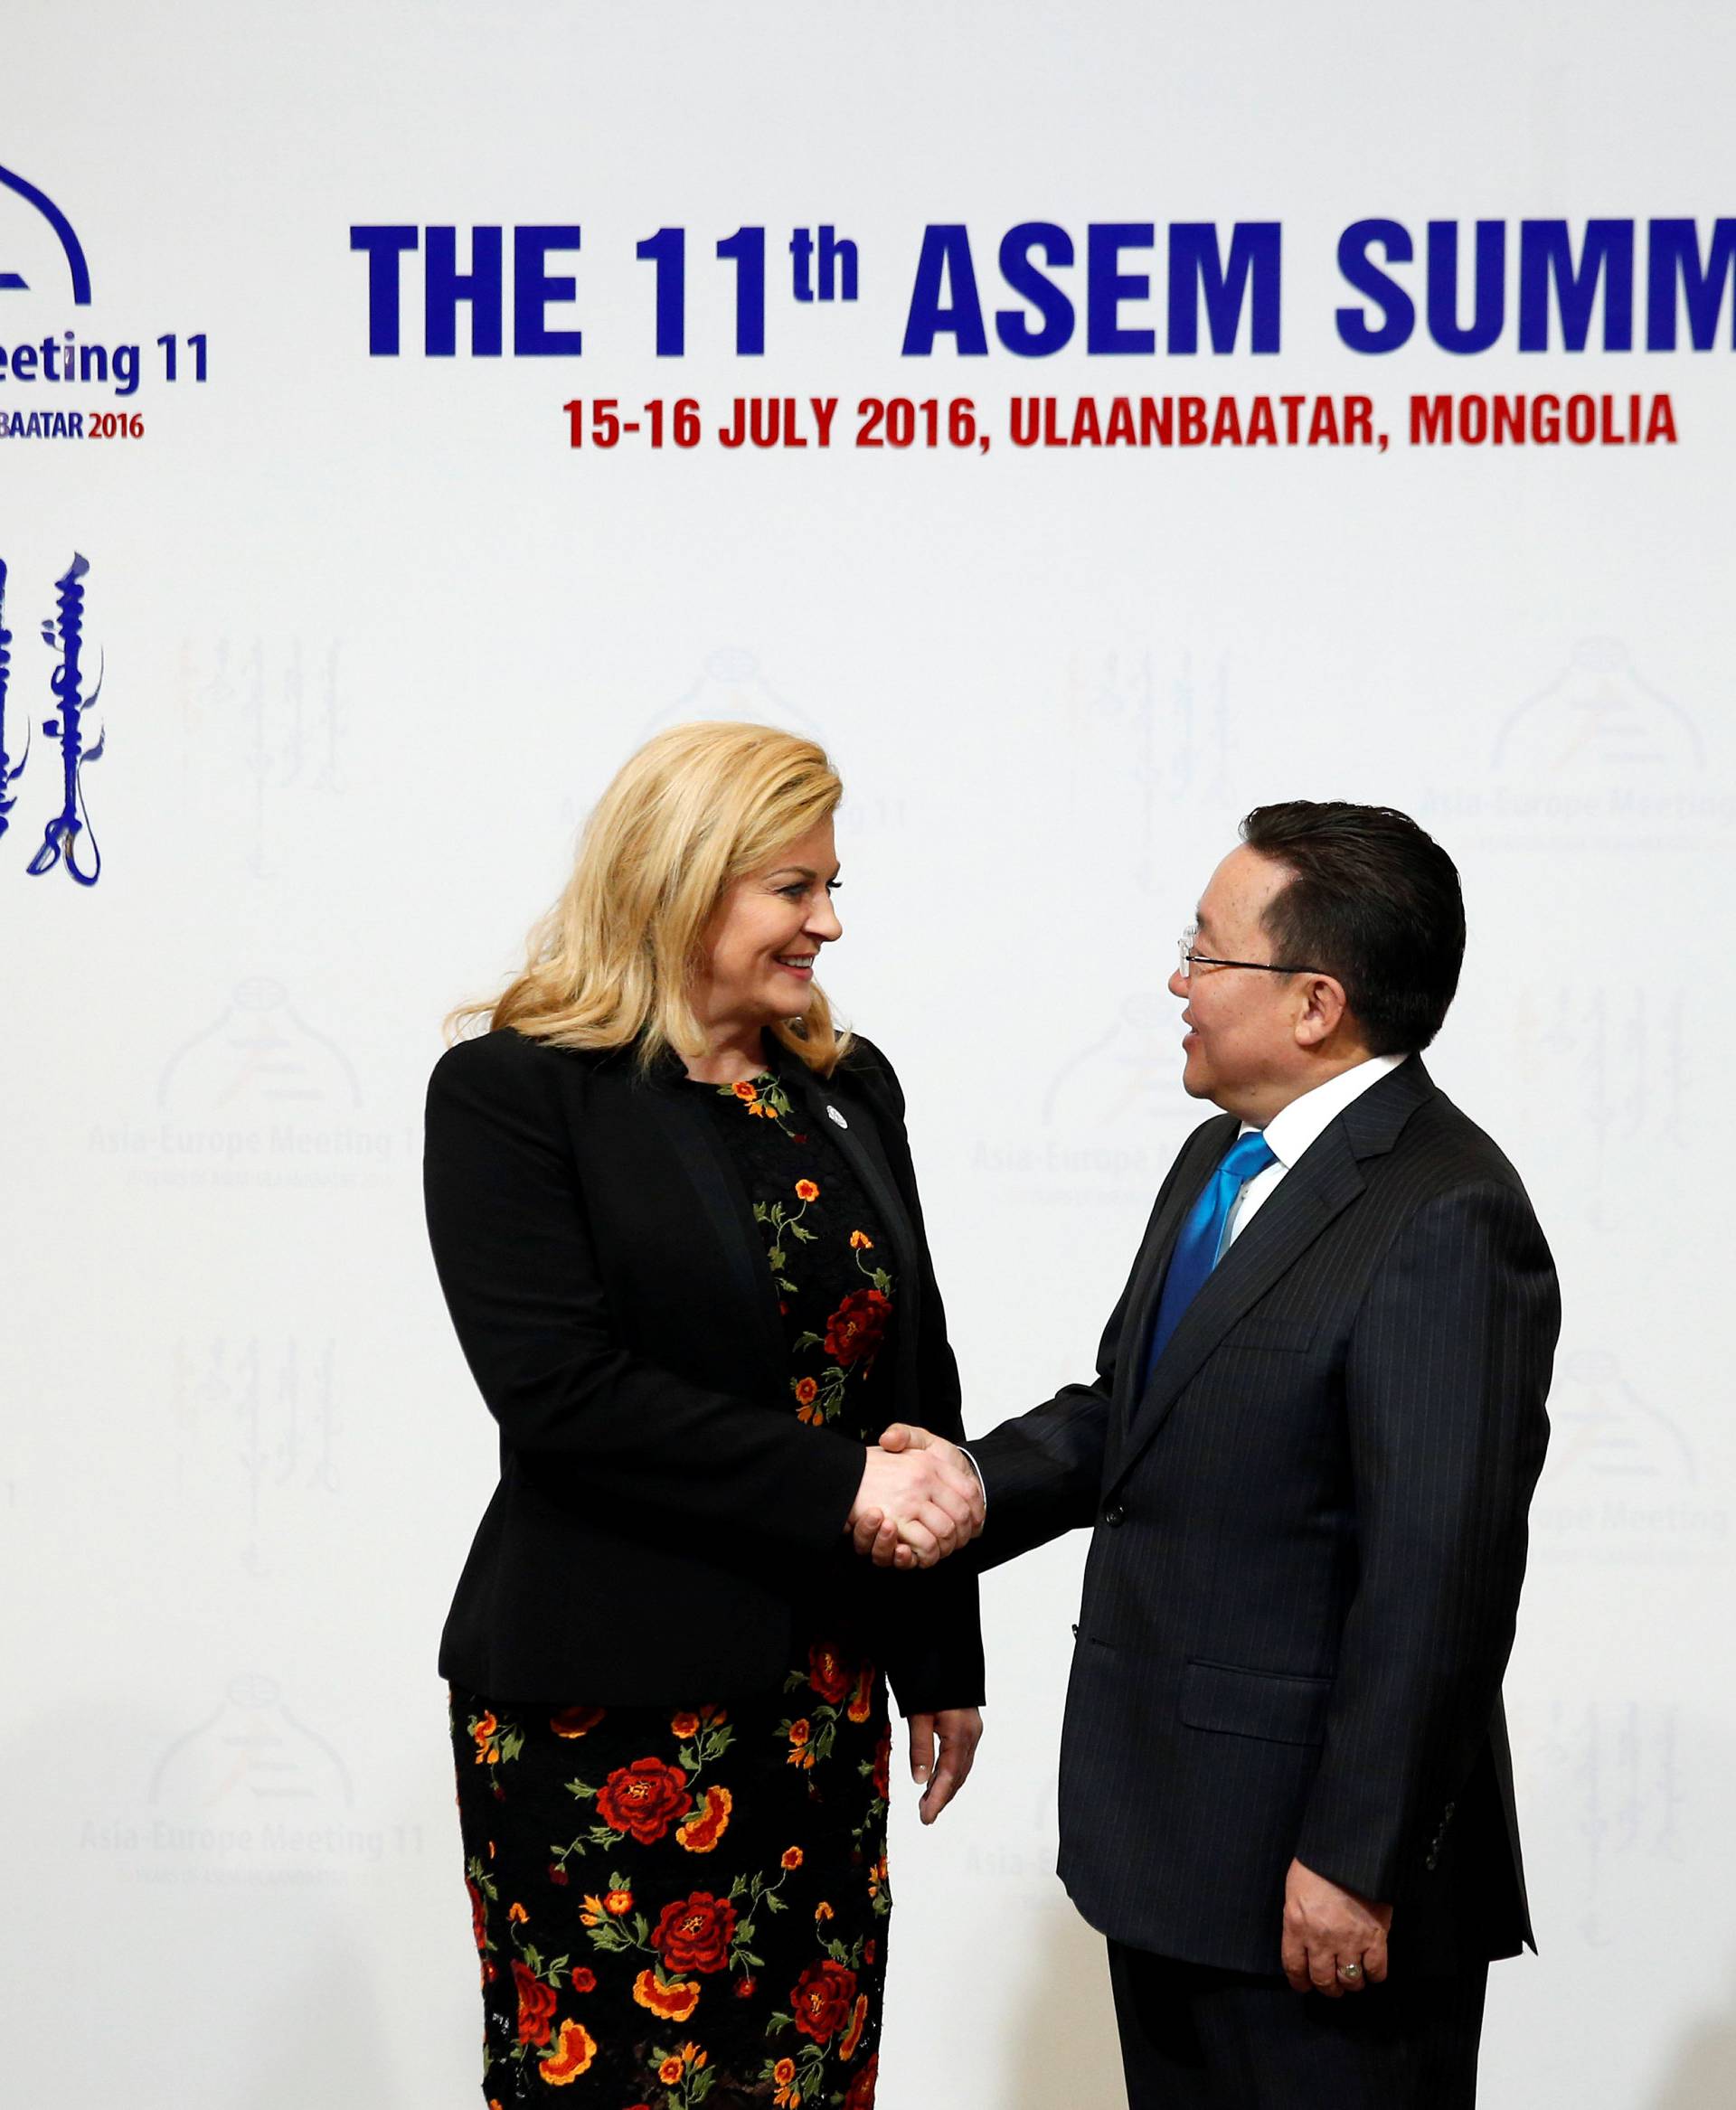 Leaders arrive the opening session of the Asia-Europe Meeting (ASEM) summit in Ulaanbaatar